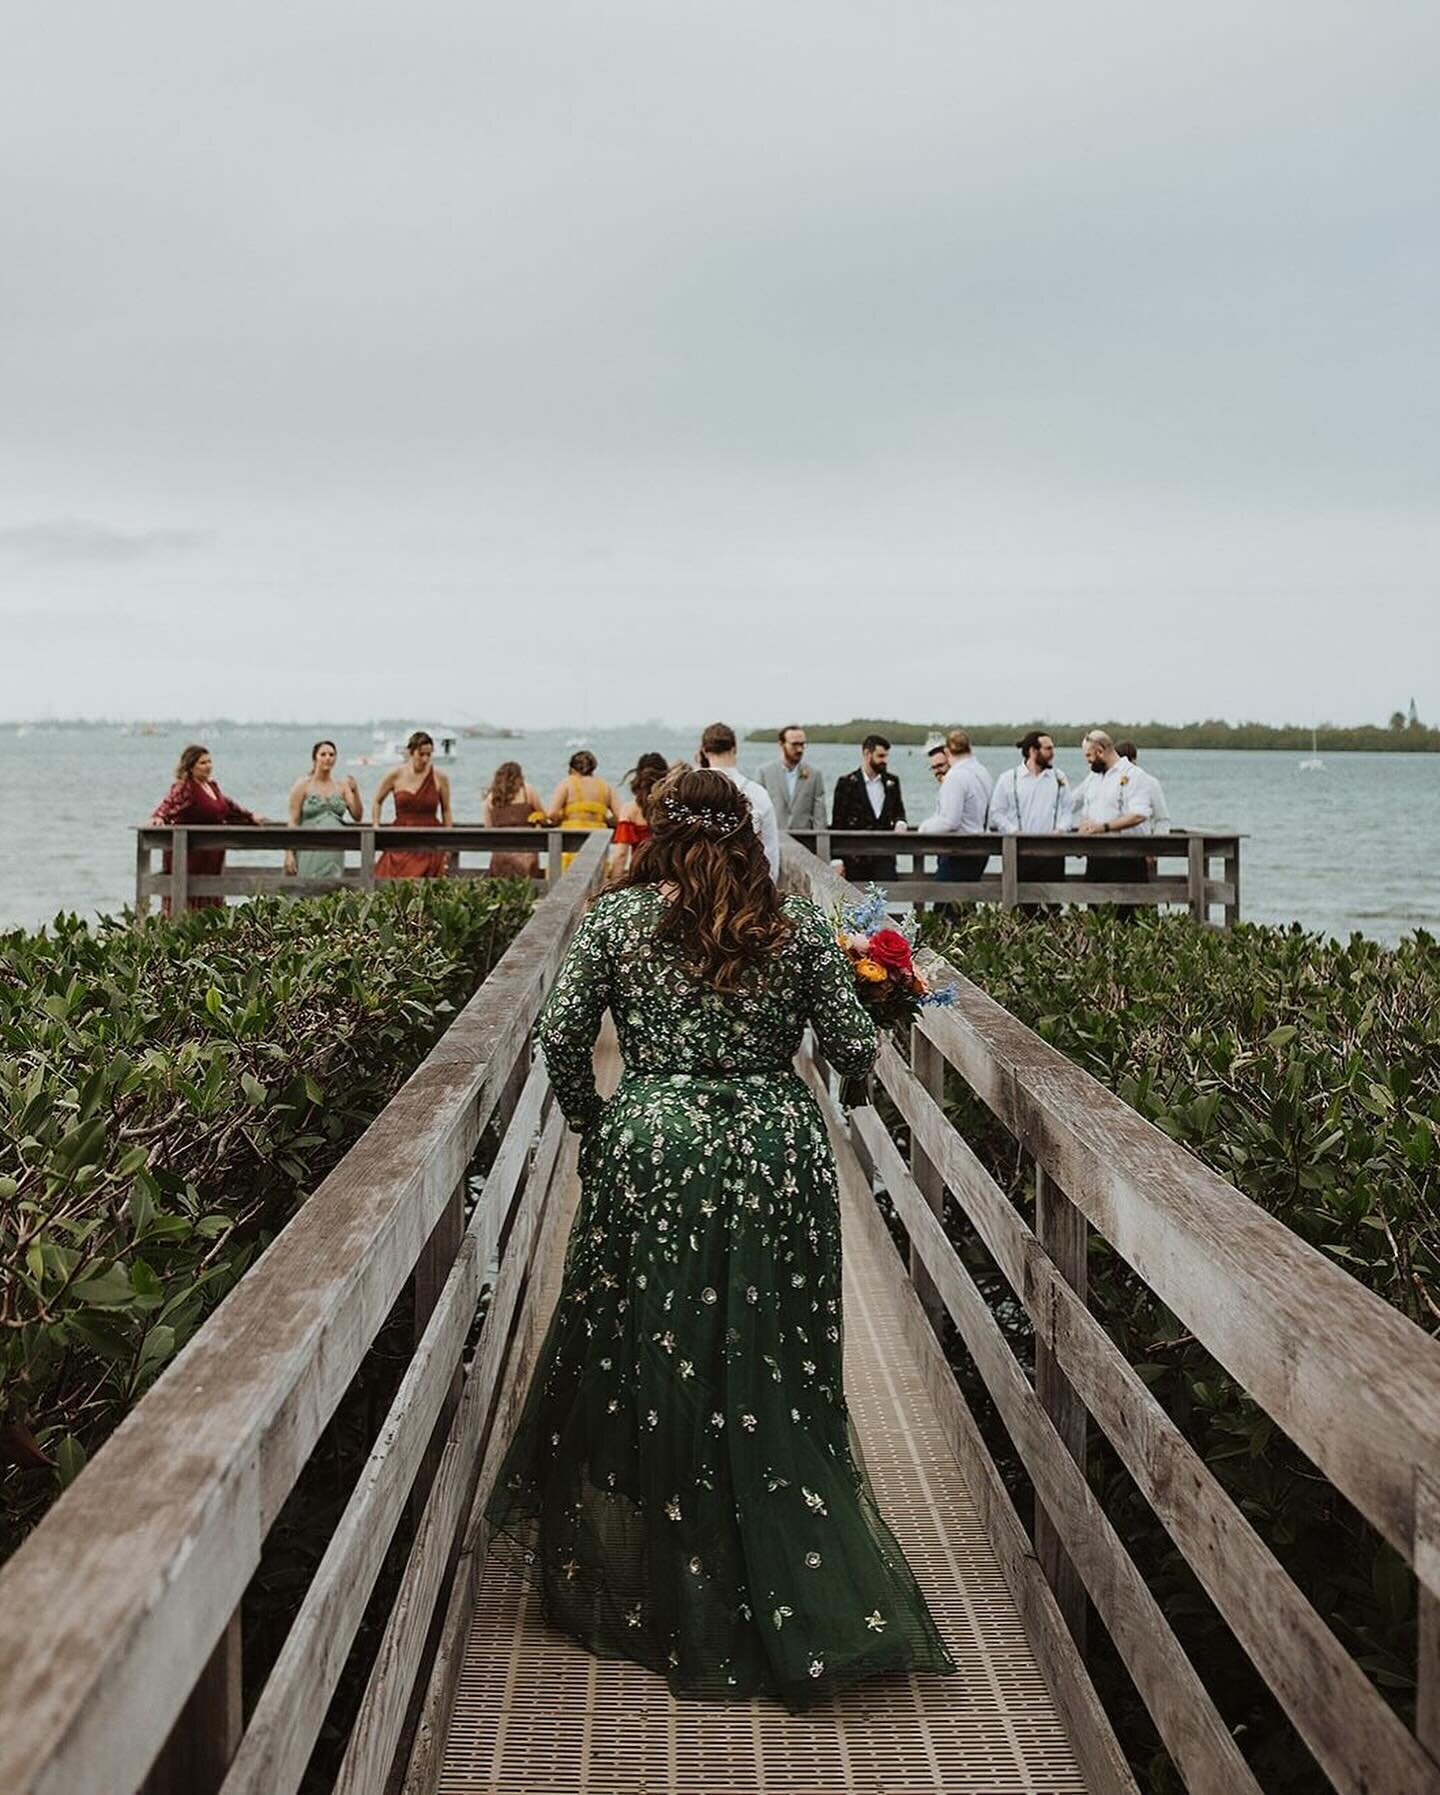 Escaping California storms this past January to wander around beaches in the Florida Keys was a pretty epic way to start the year.⁠
⁠
Even with some flight cancellations, Emily &amp; Pete made it out to the Keys and threw an amazing intimate wedding 